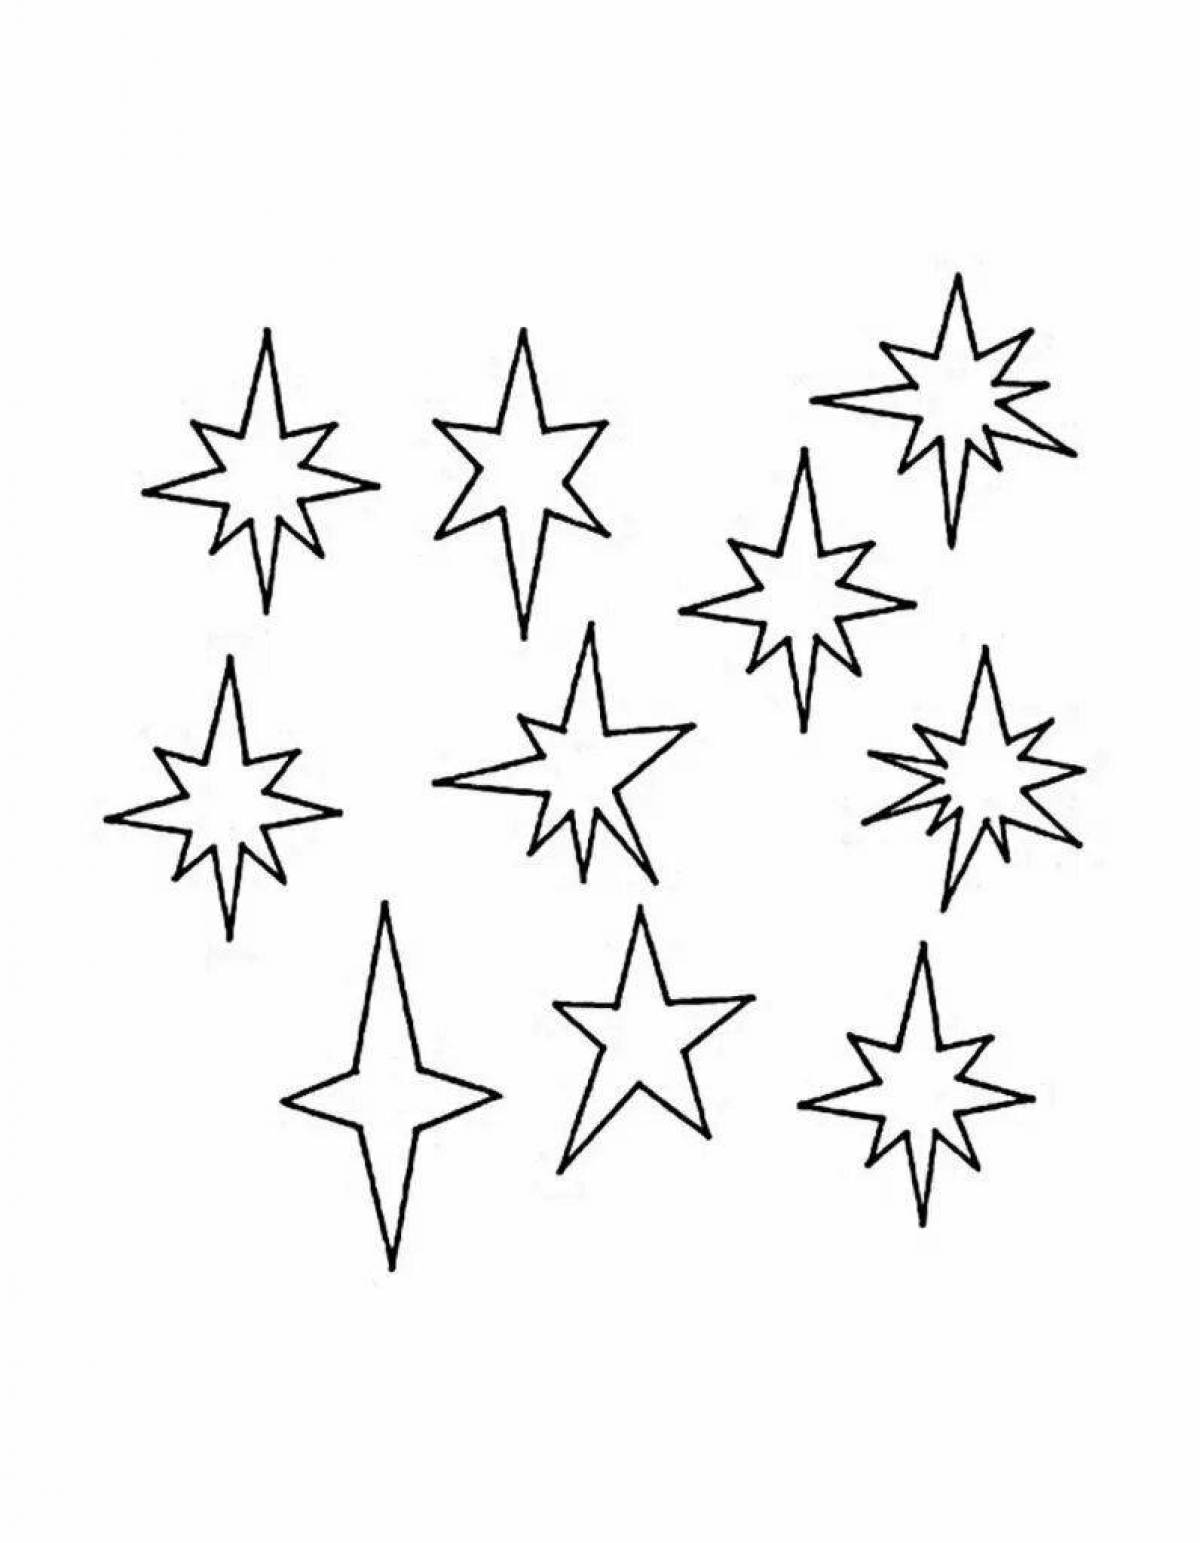 Coloring book glowing little stars